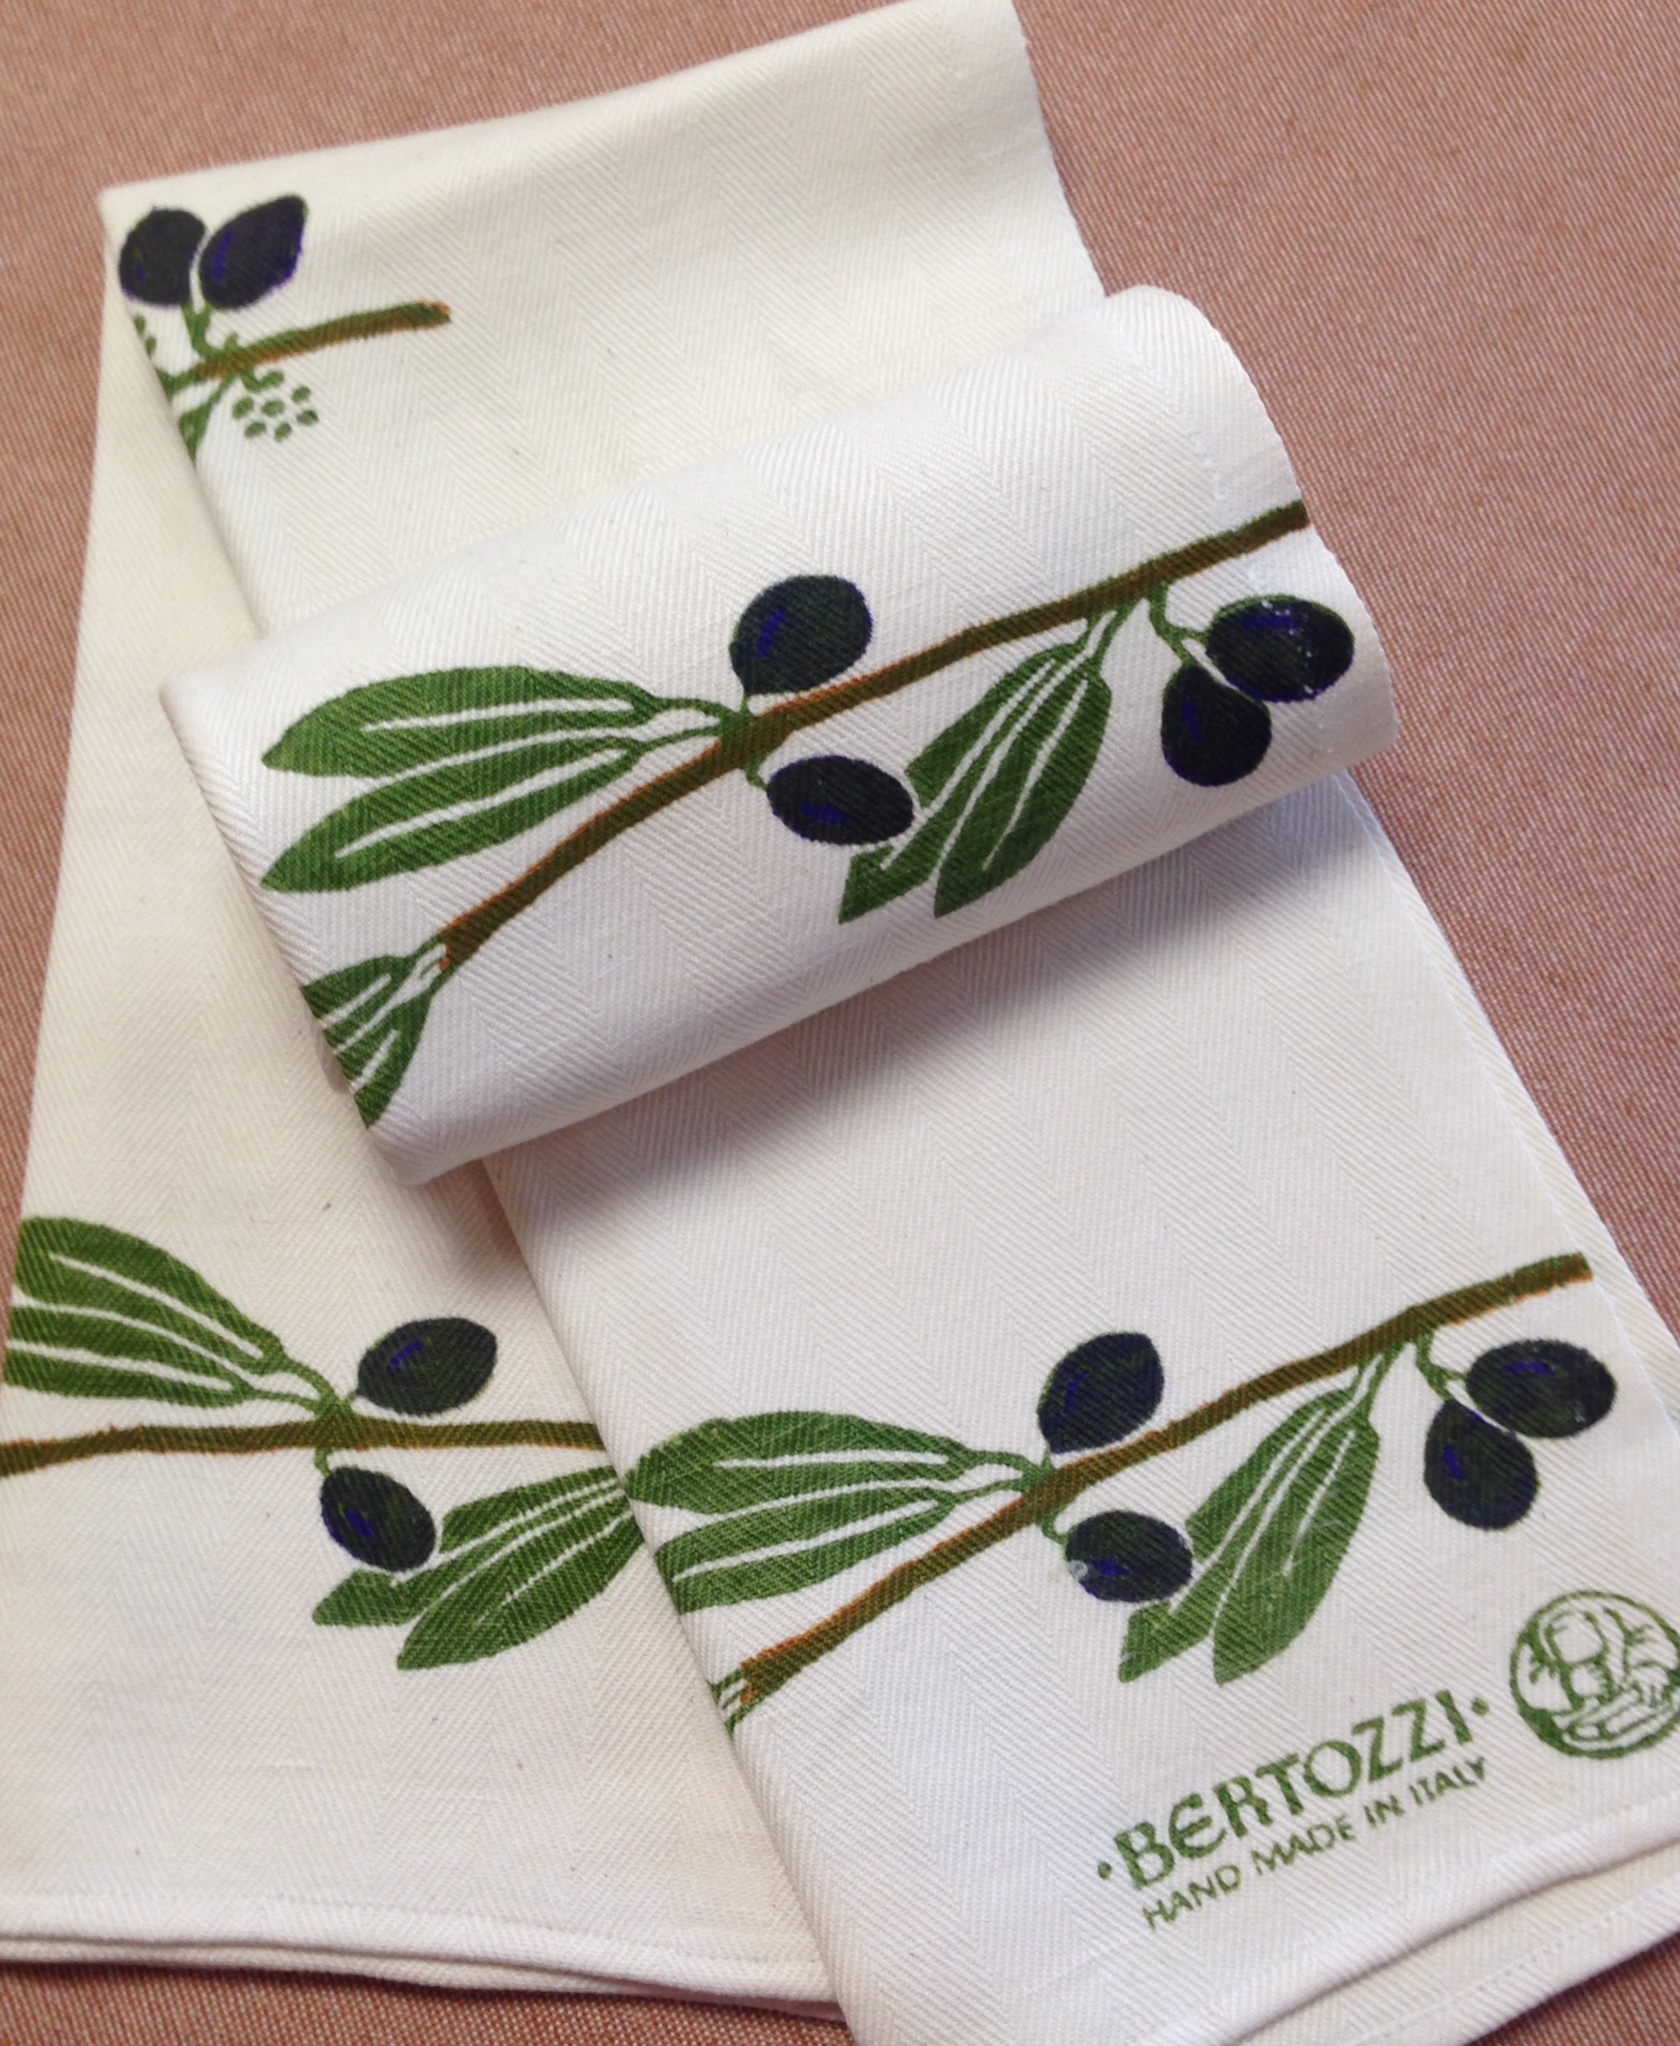 Linen Kitchen Towel - Our Italian Table